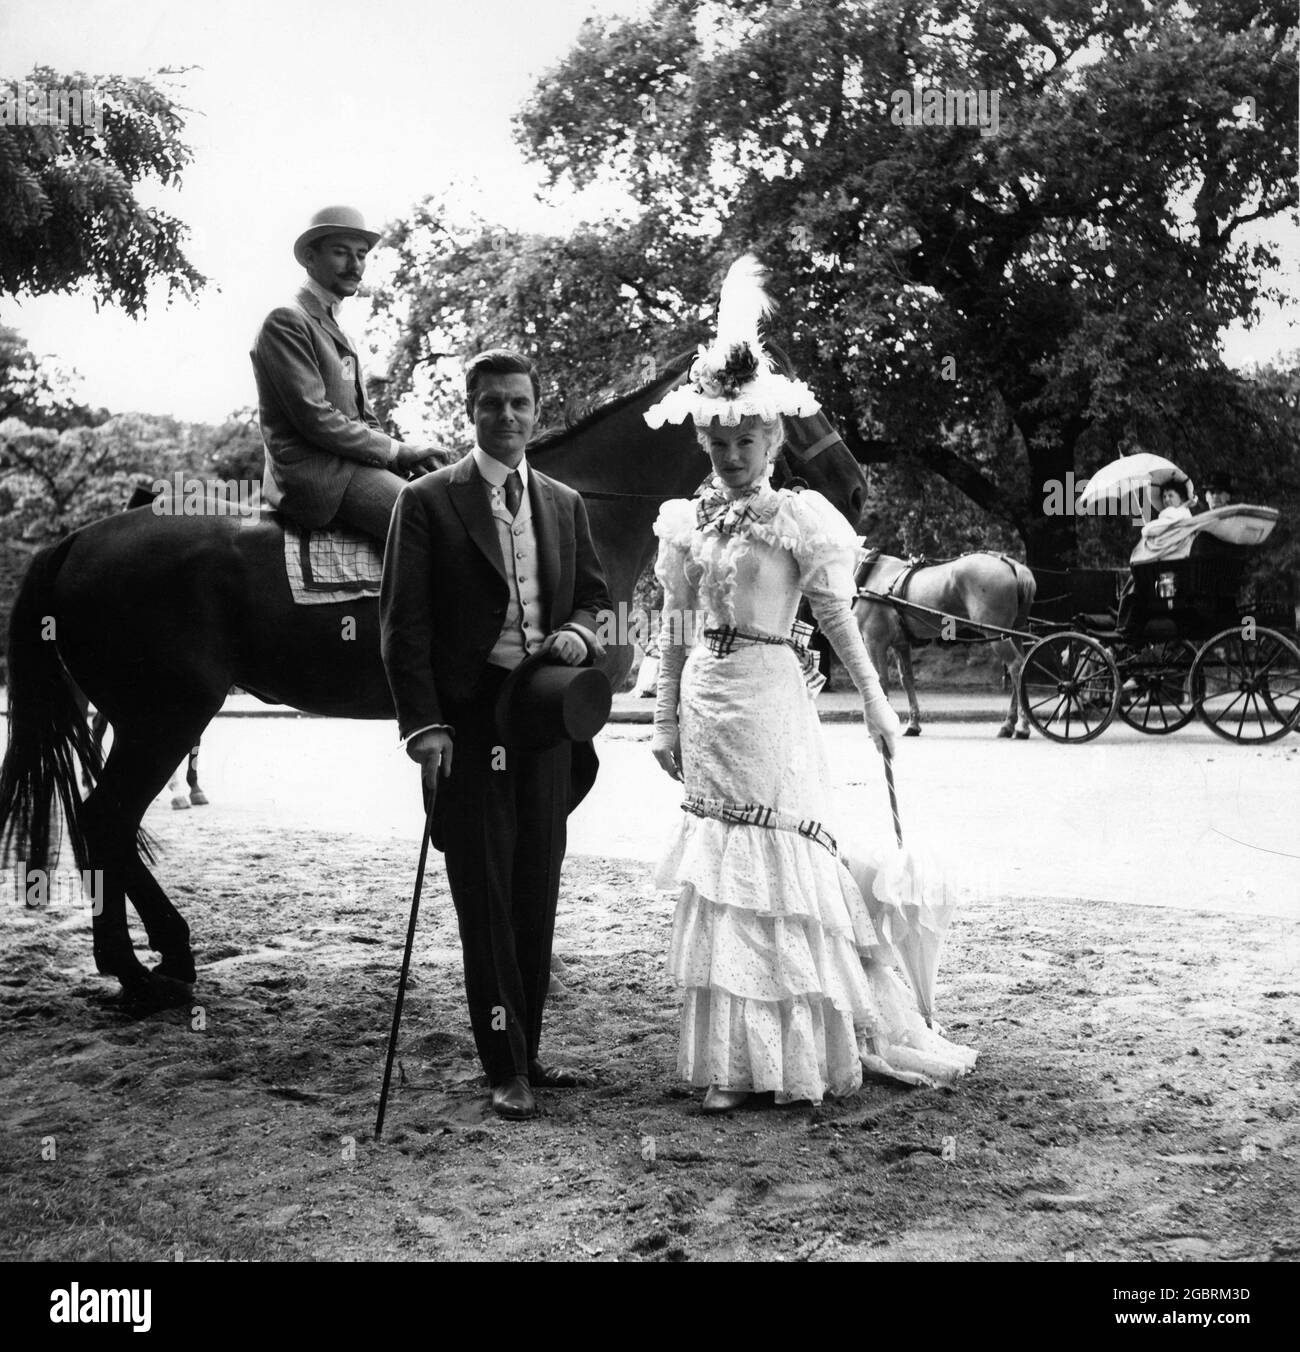 LOUIS JOURDAN and Featured Extras modelling Costumes by CECIL BEATON on set during location filming in Paris of GIGI 1958 director VINCENTE MINNELLI based on novella by Colette screenplay / lyrics Alan Jay Lerner music Frederick Loewe production design / costumes Cecil Beaton producer Arthur Freed Metro Goldwyn Mayer Stock Photo